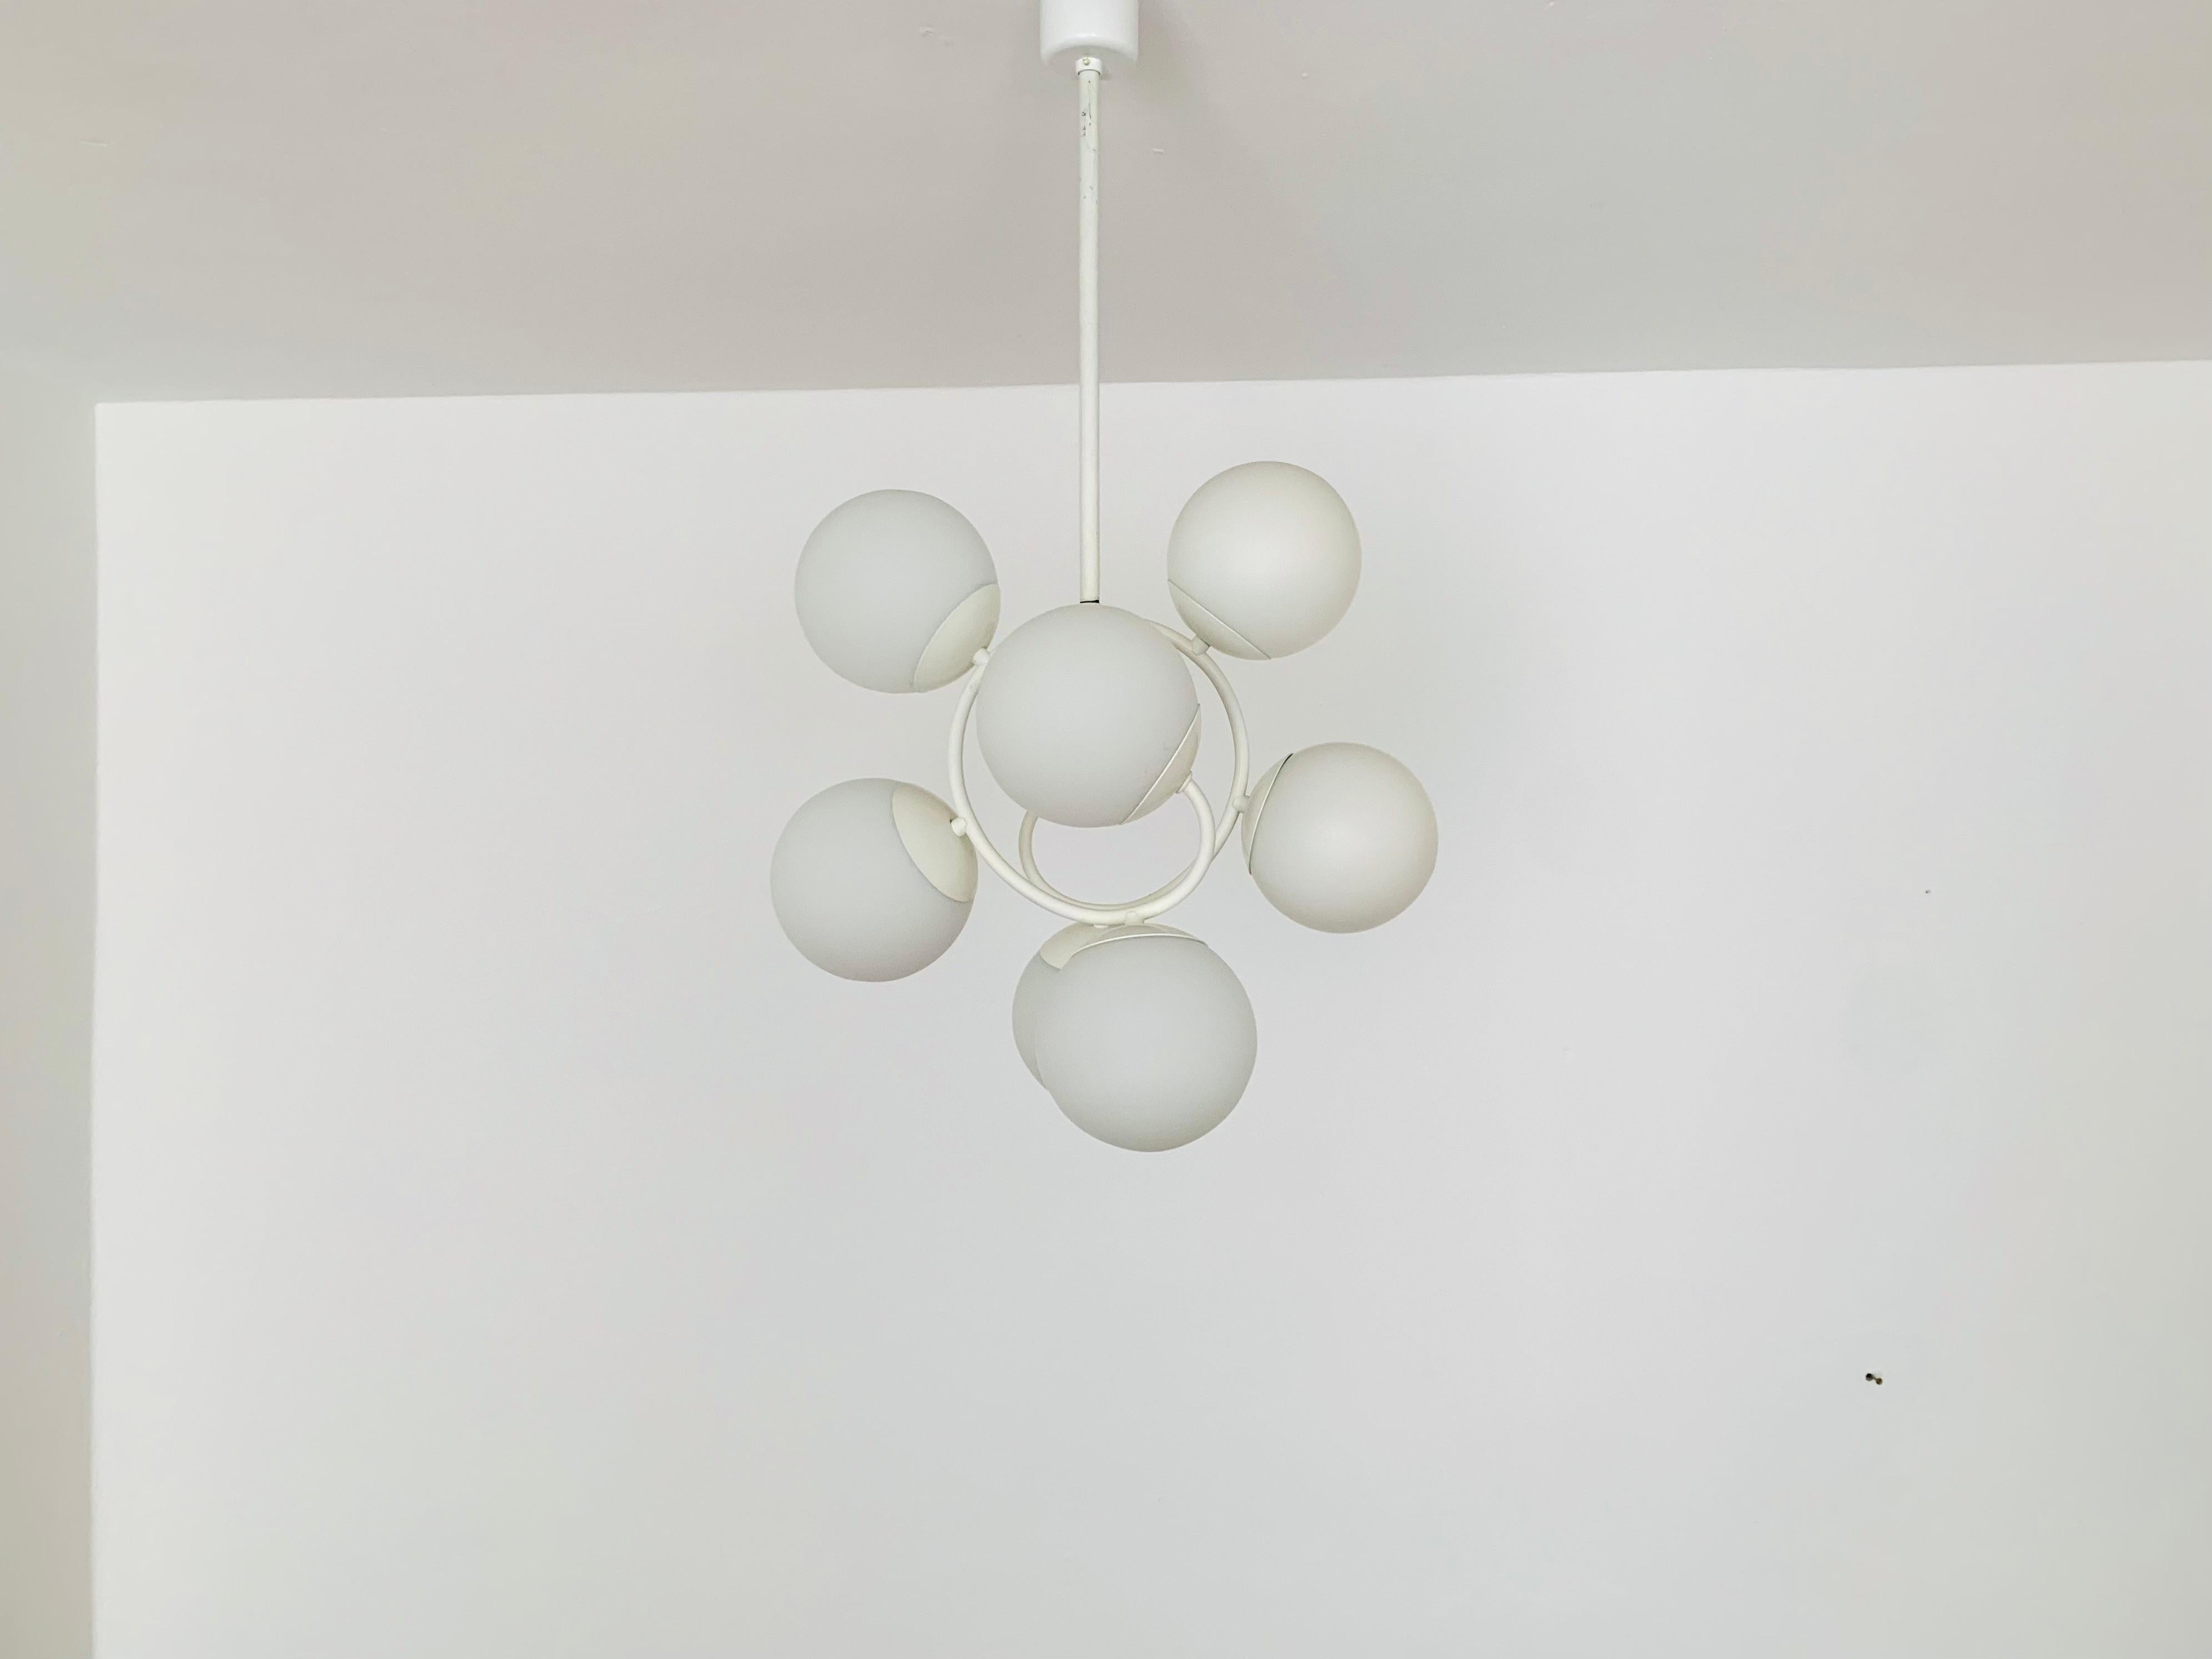 Wonderful Sputnik chandelier from the 1960s.
The 8 opal glass lampshades spread a pleasant light.
The lamp has a very high quality finish.
Very contemporary design with a fantastic look.

Manufacturer: Kaiser Leuchten

Condition:

Very good vintage